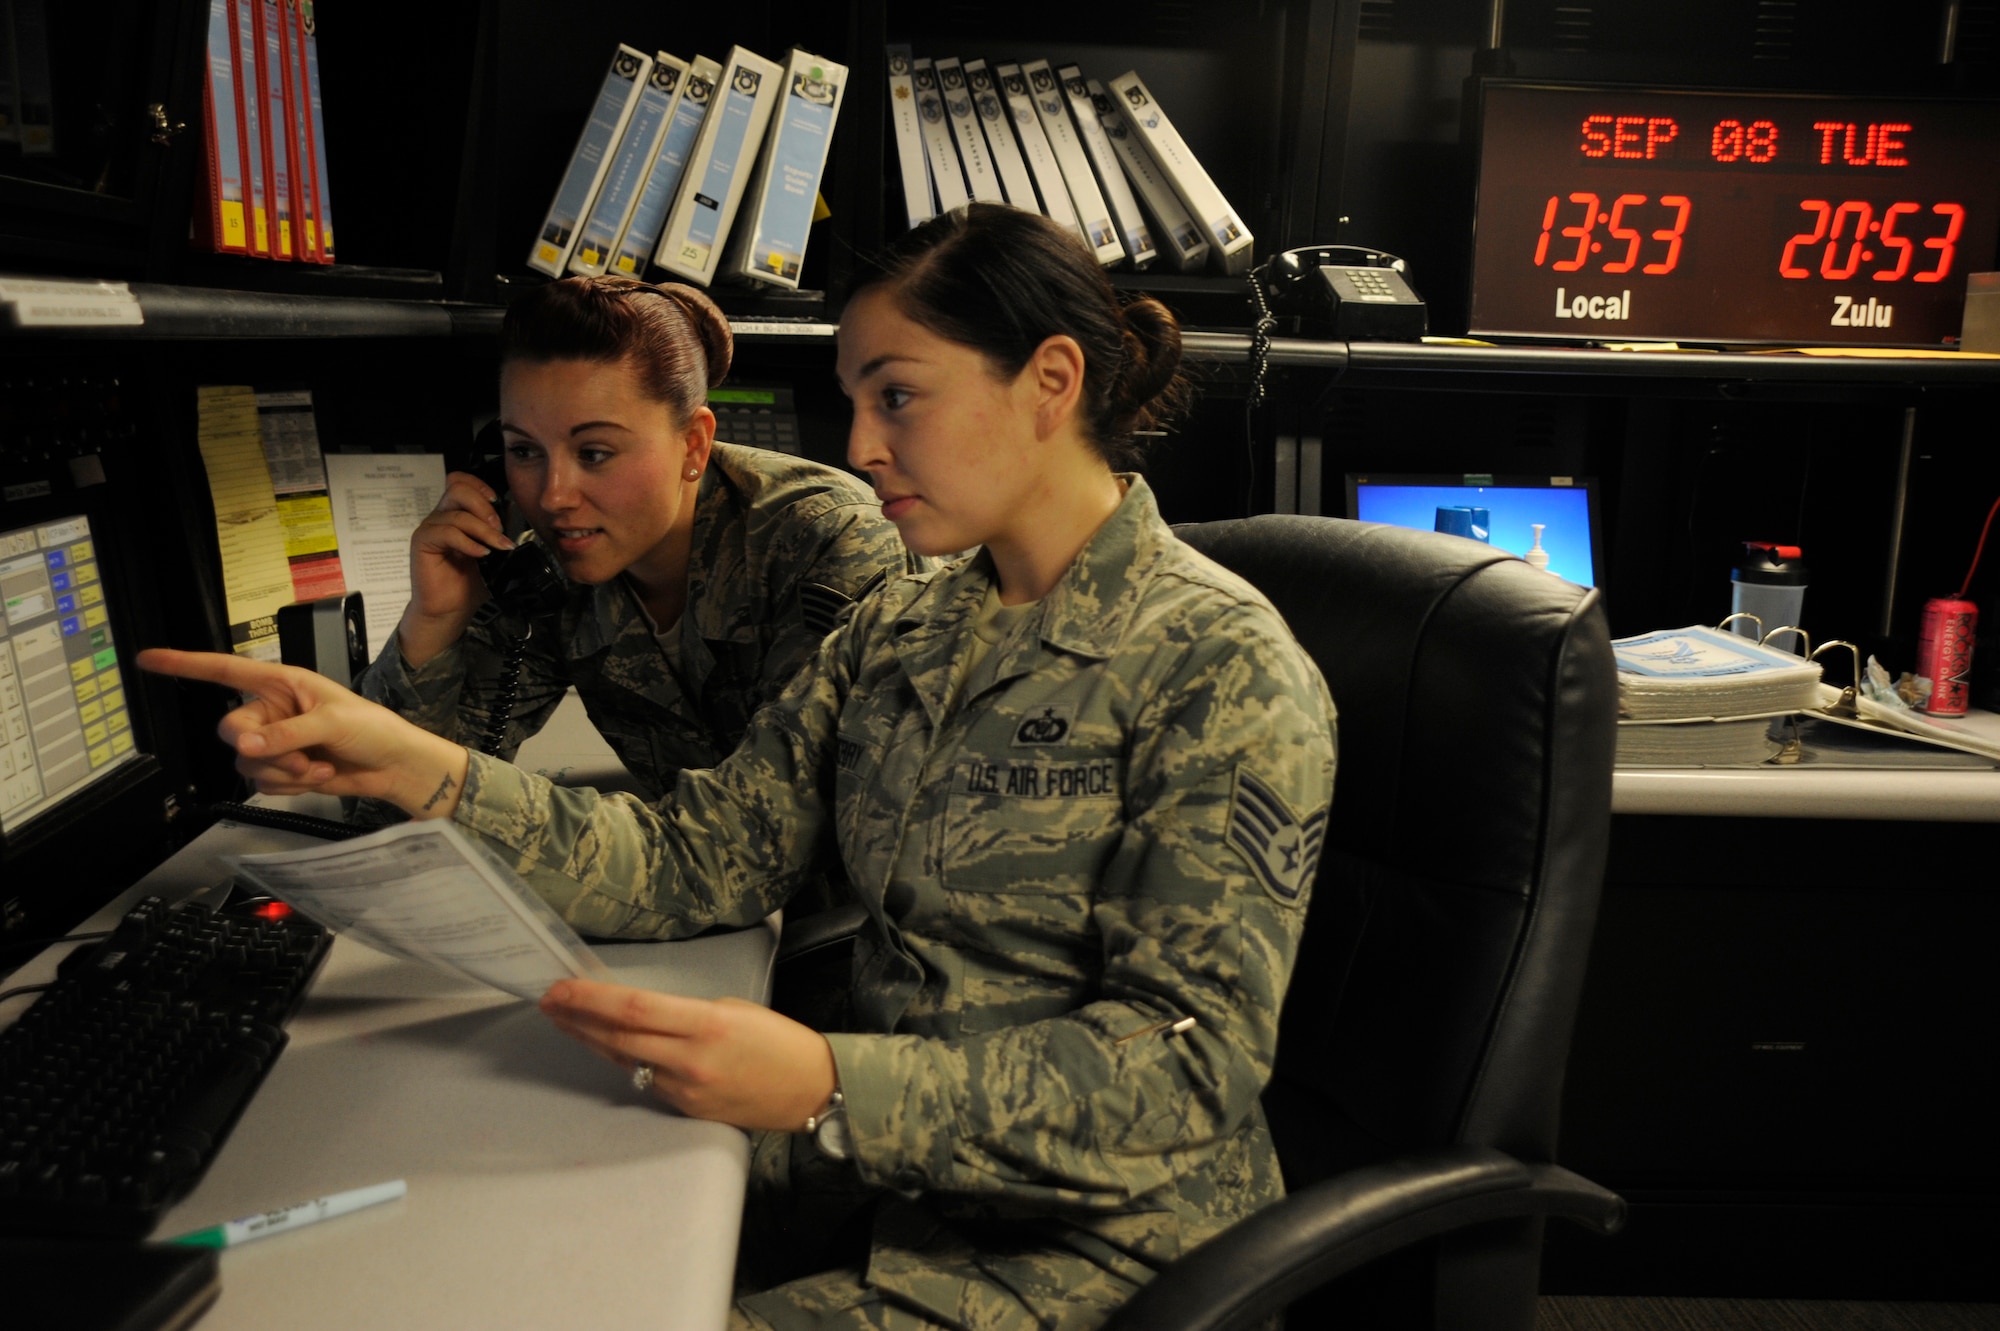 Staff Sgt. Danielle Horn, 30th Space Wing command post NCO in charge of reports (left) and Staff Sgt. Brittany Benberry, 30th SW command post NCOIC of training (right), prepare for the Combatant Command evaluation, Sep. 8, 2015, Vandenberg Air Force Base, Calif. The command post personnel work shifts around the clock, prepared at a moment’s notice to contact the commander or relay information to or from higher headquarters. (U.S. Air Force photo by Airman 1st Class Robert Volio/Released)